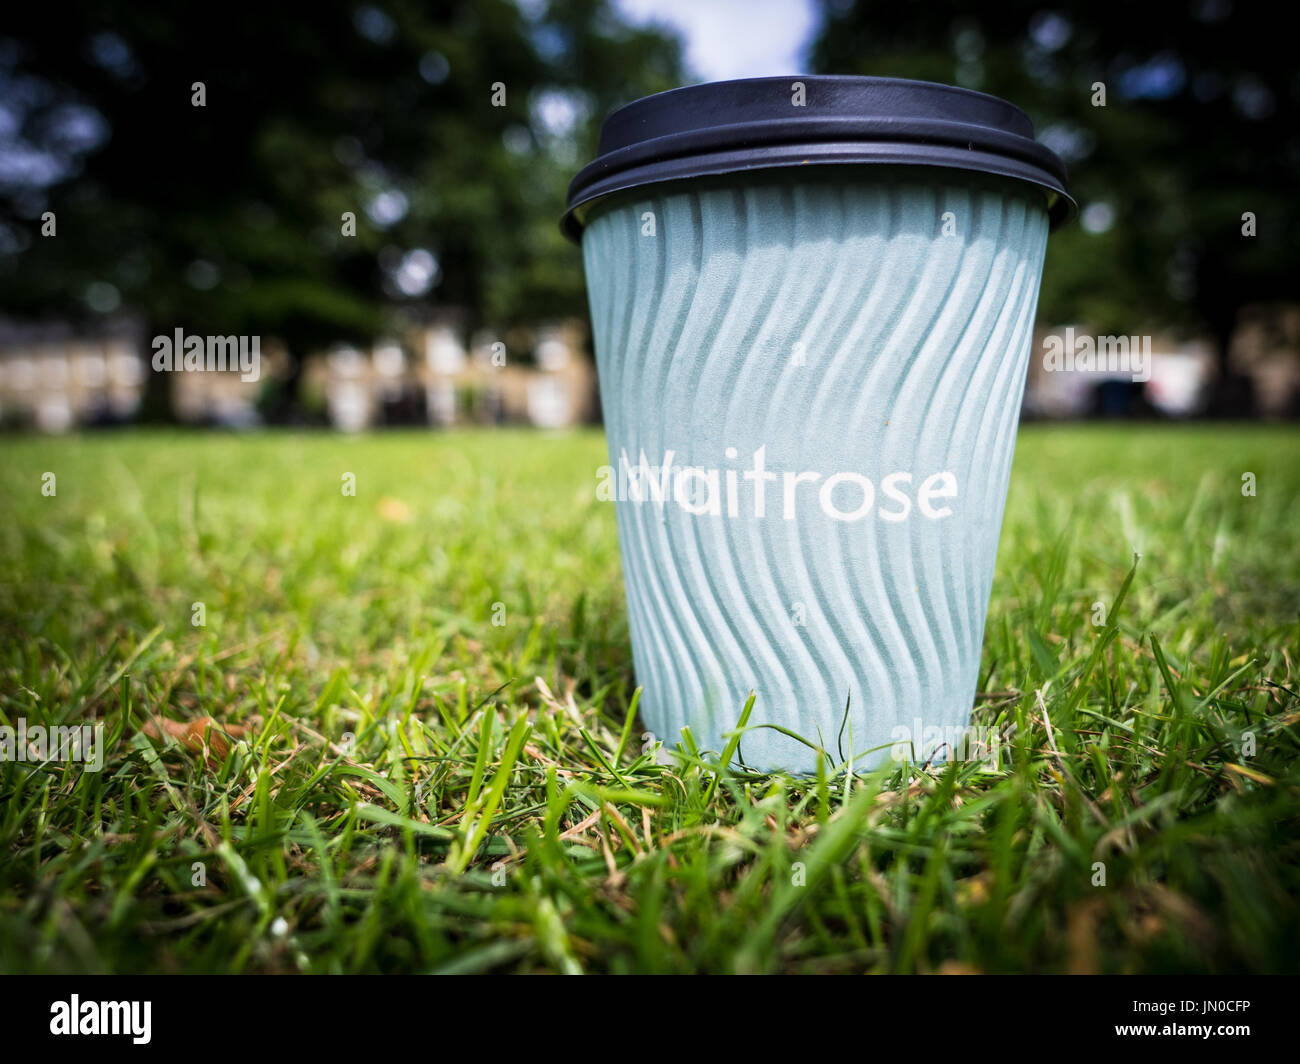 A Waitrose Complimentary Coffee Cup on a park lawn. Stock Photo